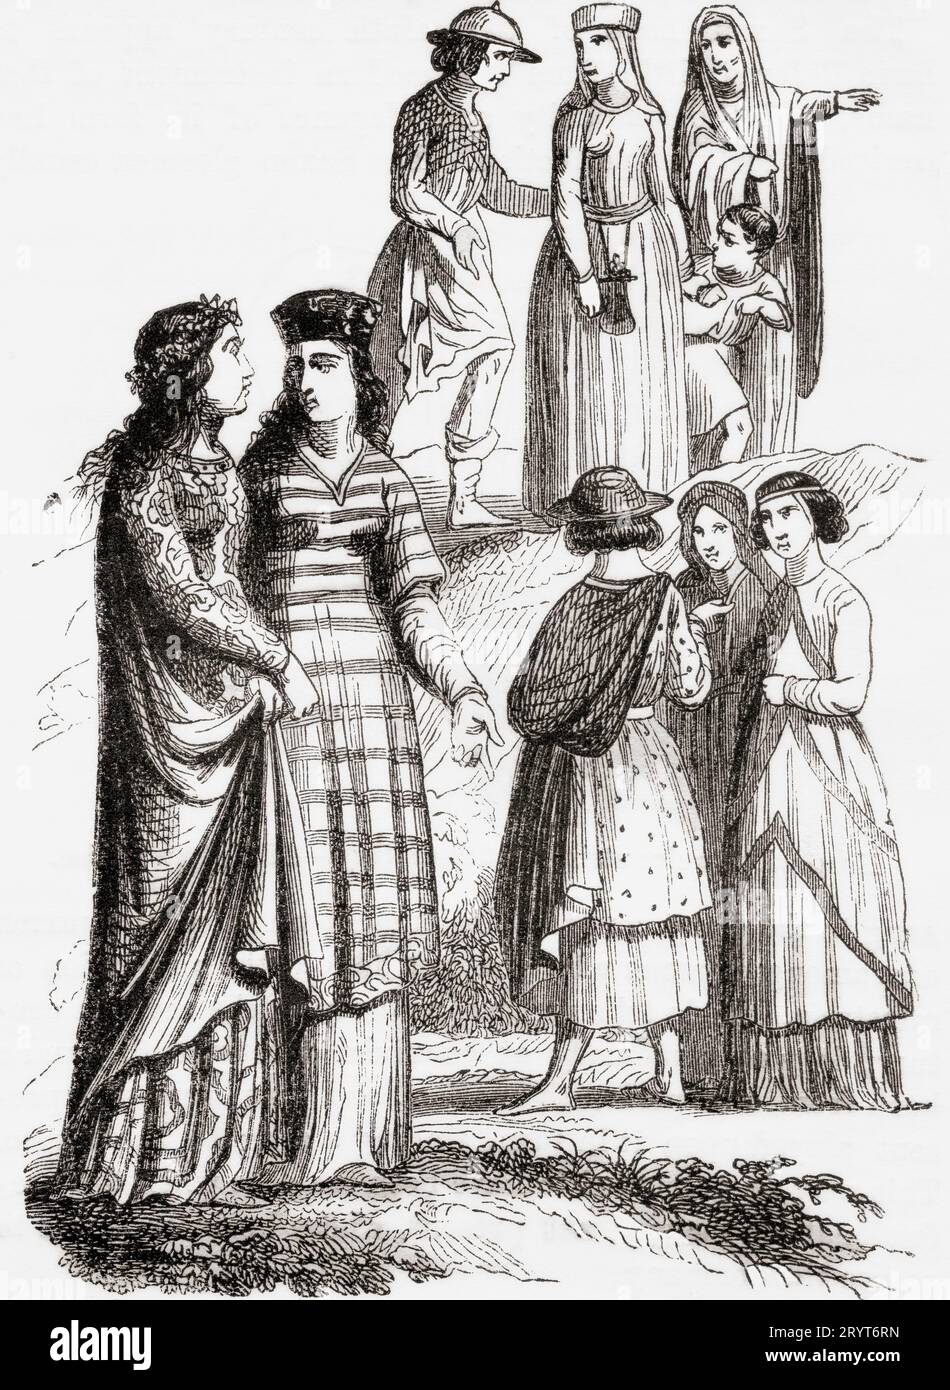 Norman costumes of the 11th century.  Nobles, ladies and citizens.  From Cassell's Illustrated History of England, published 1857. Stock Photo